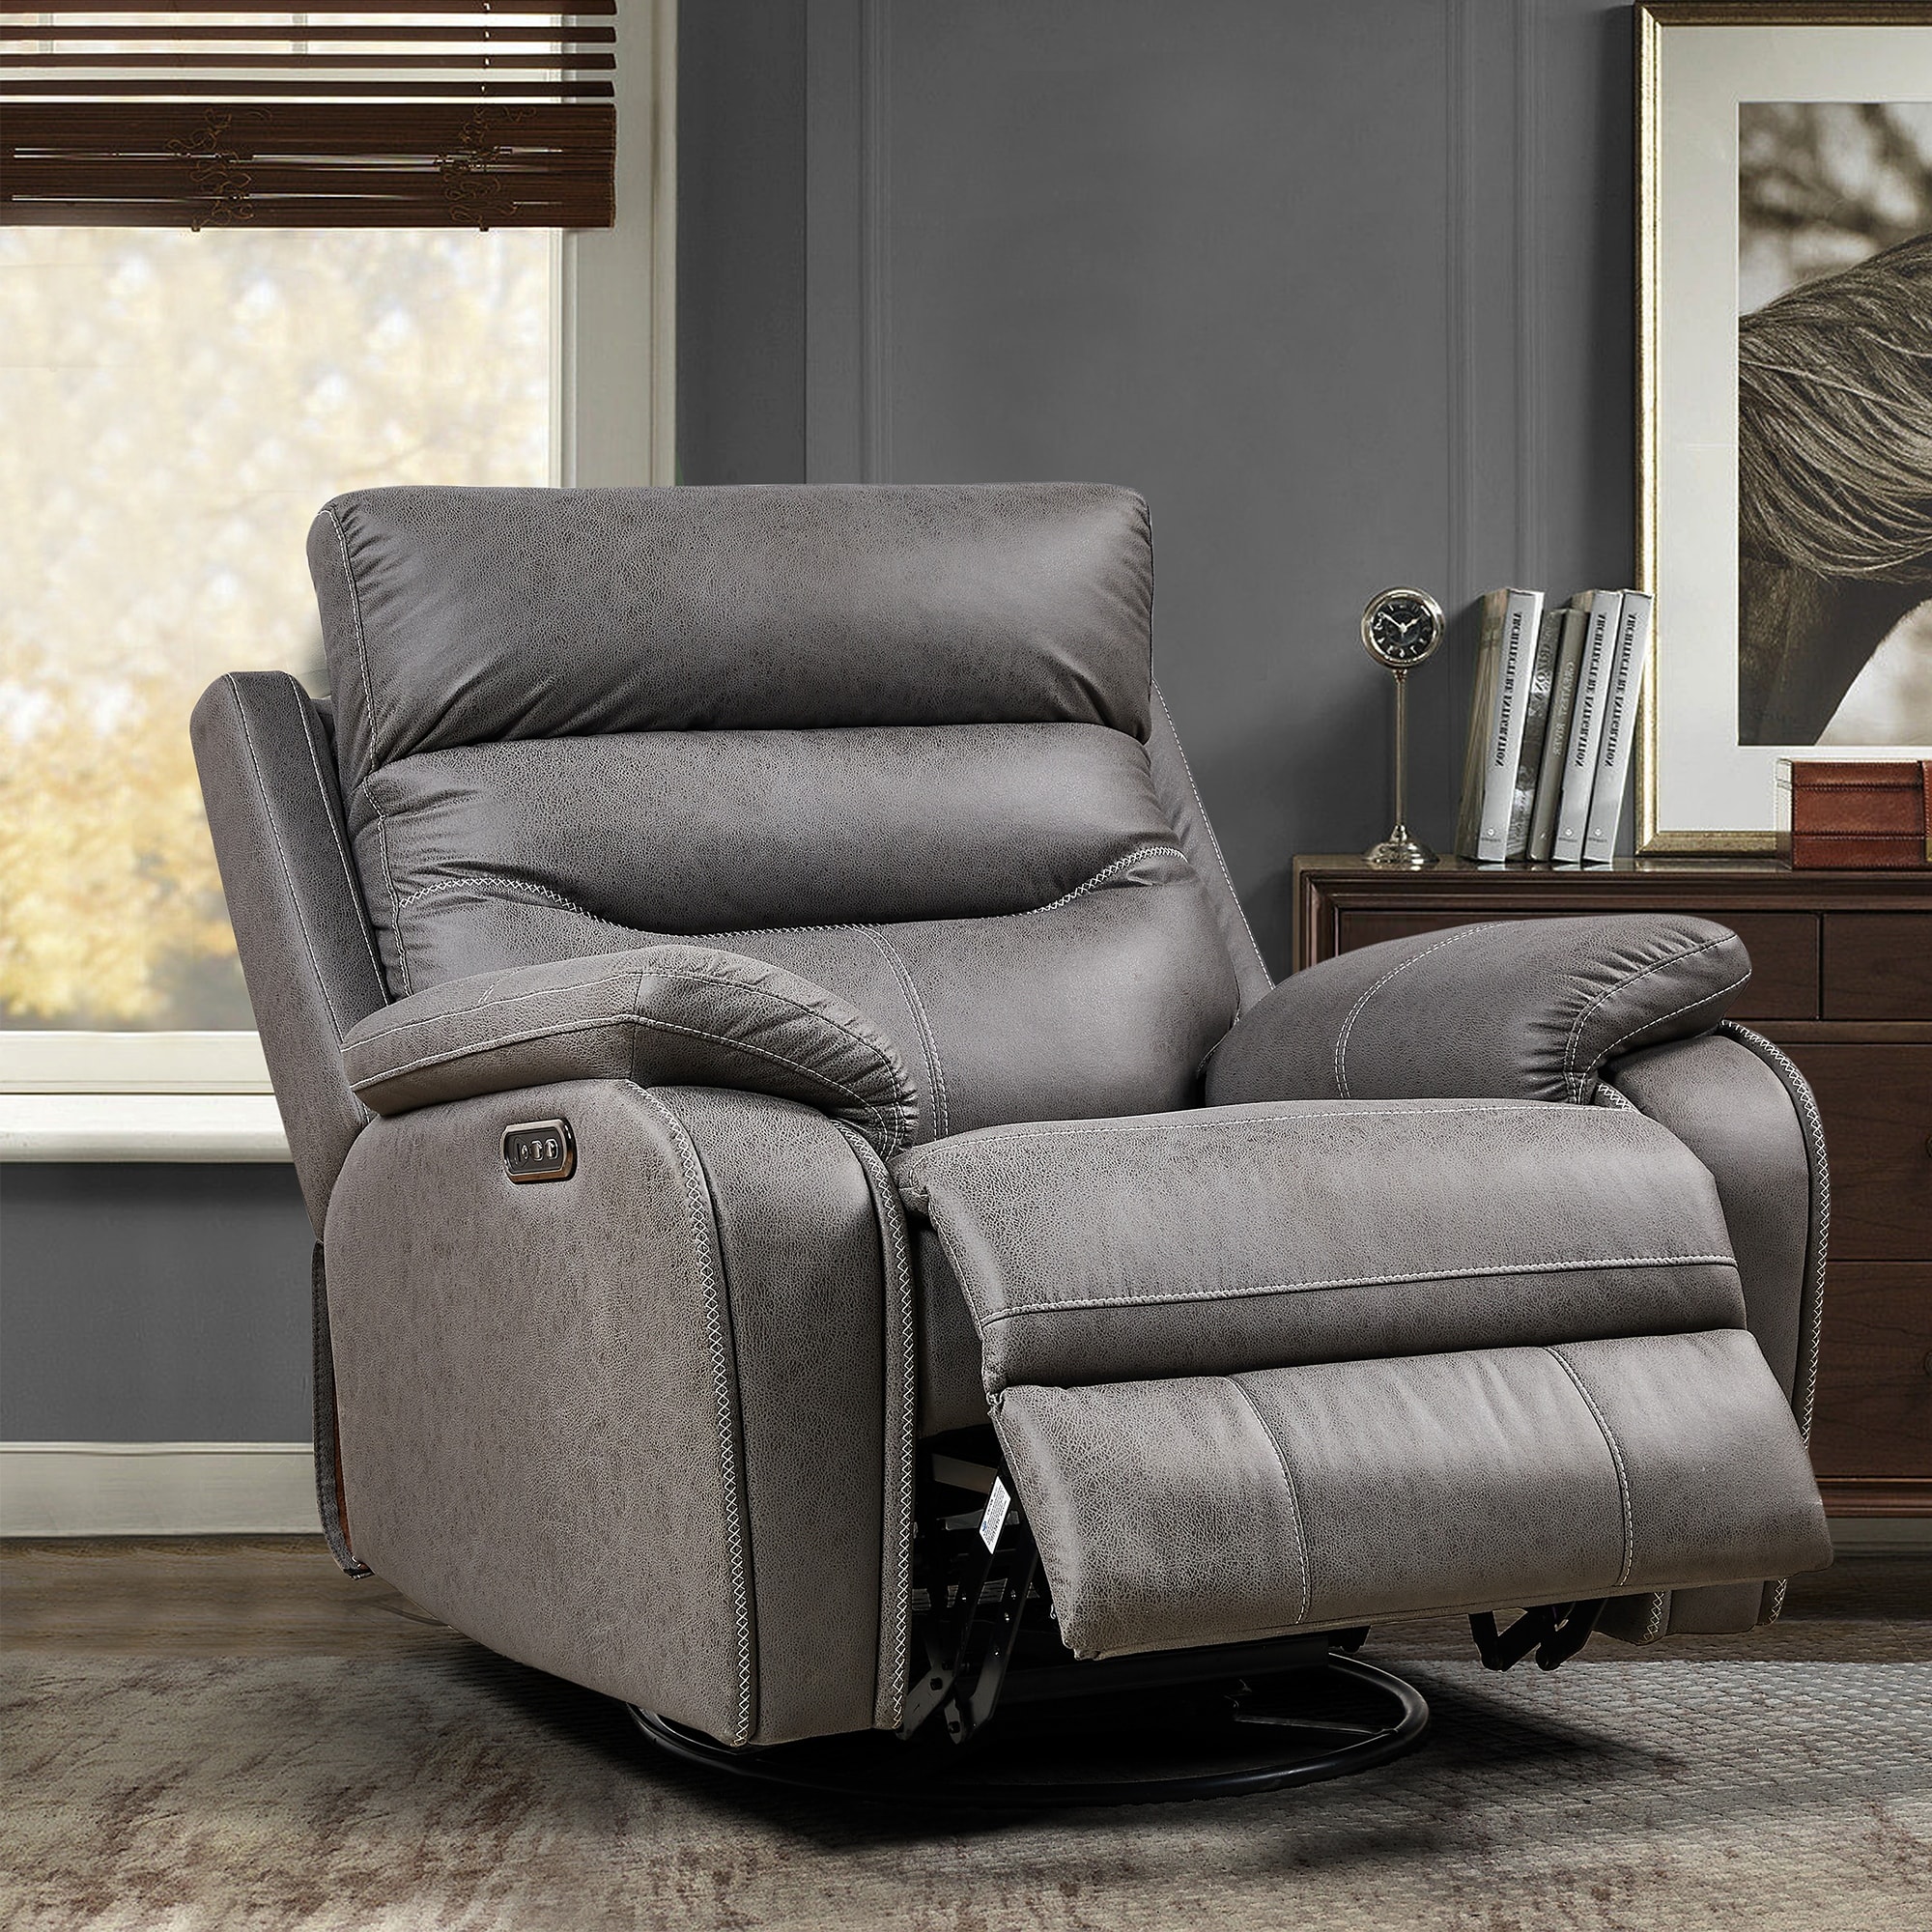 360 Degree Swivel Single Sofa Seat, Recliner Chair Infinite Position with  Adjust Power Headrest and Extending Footrest